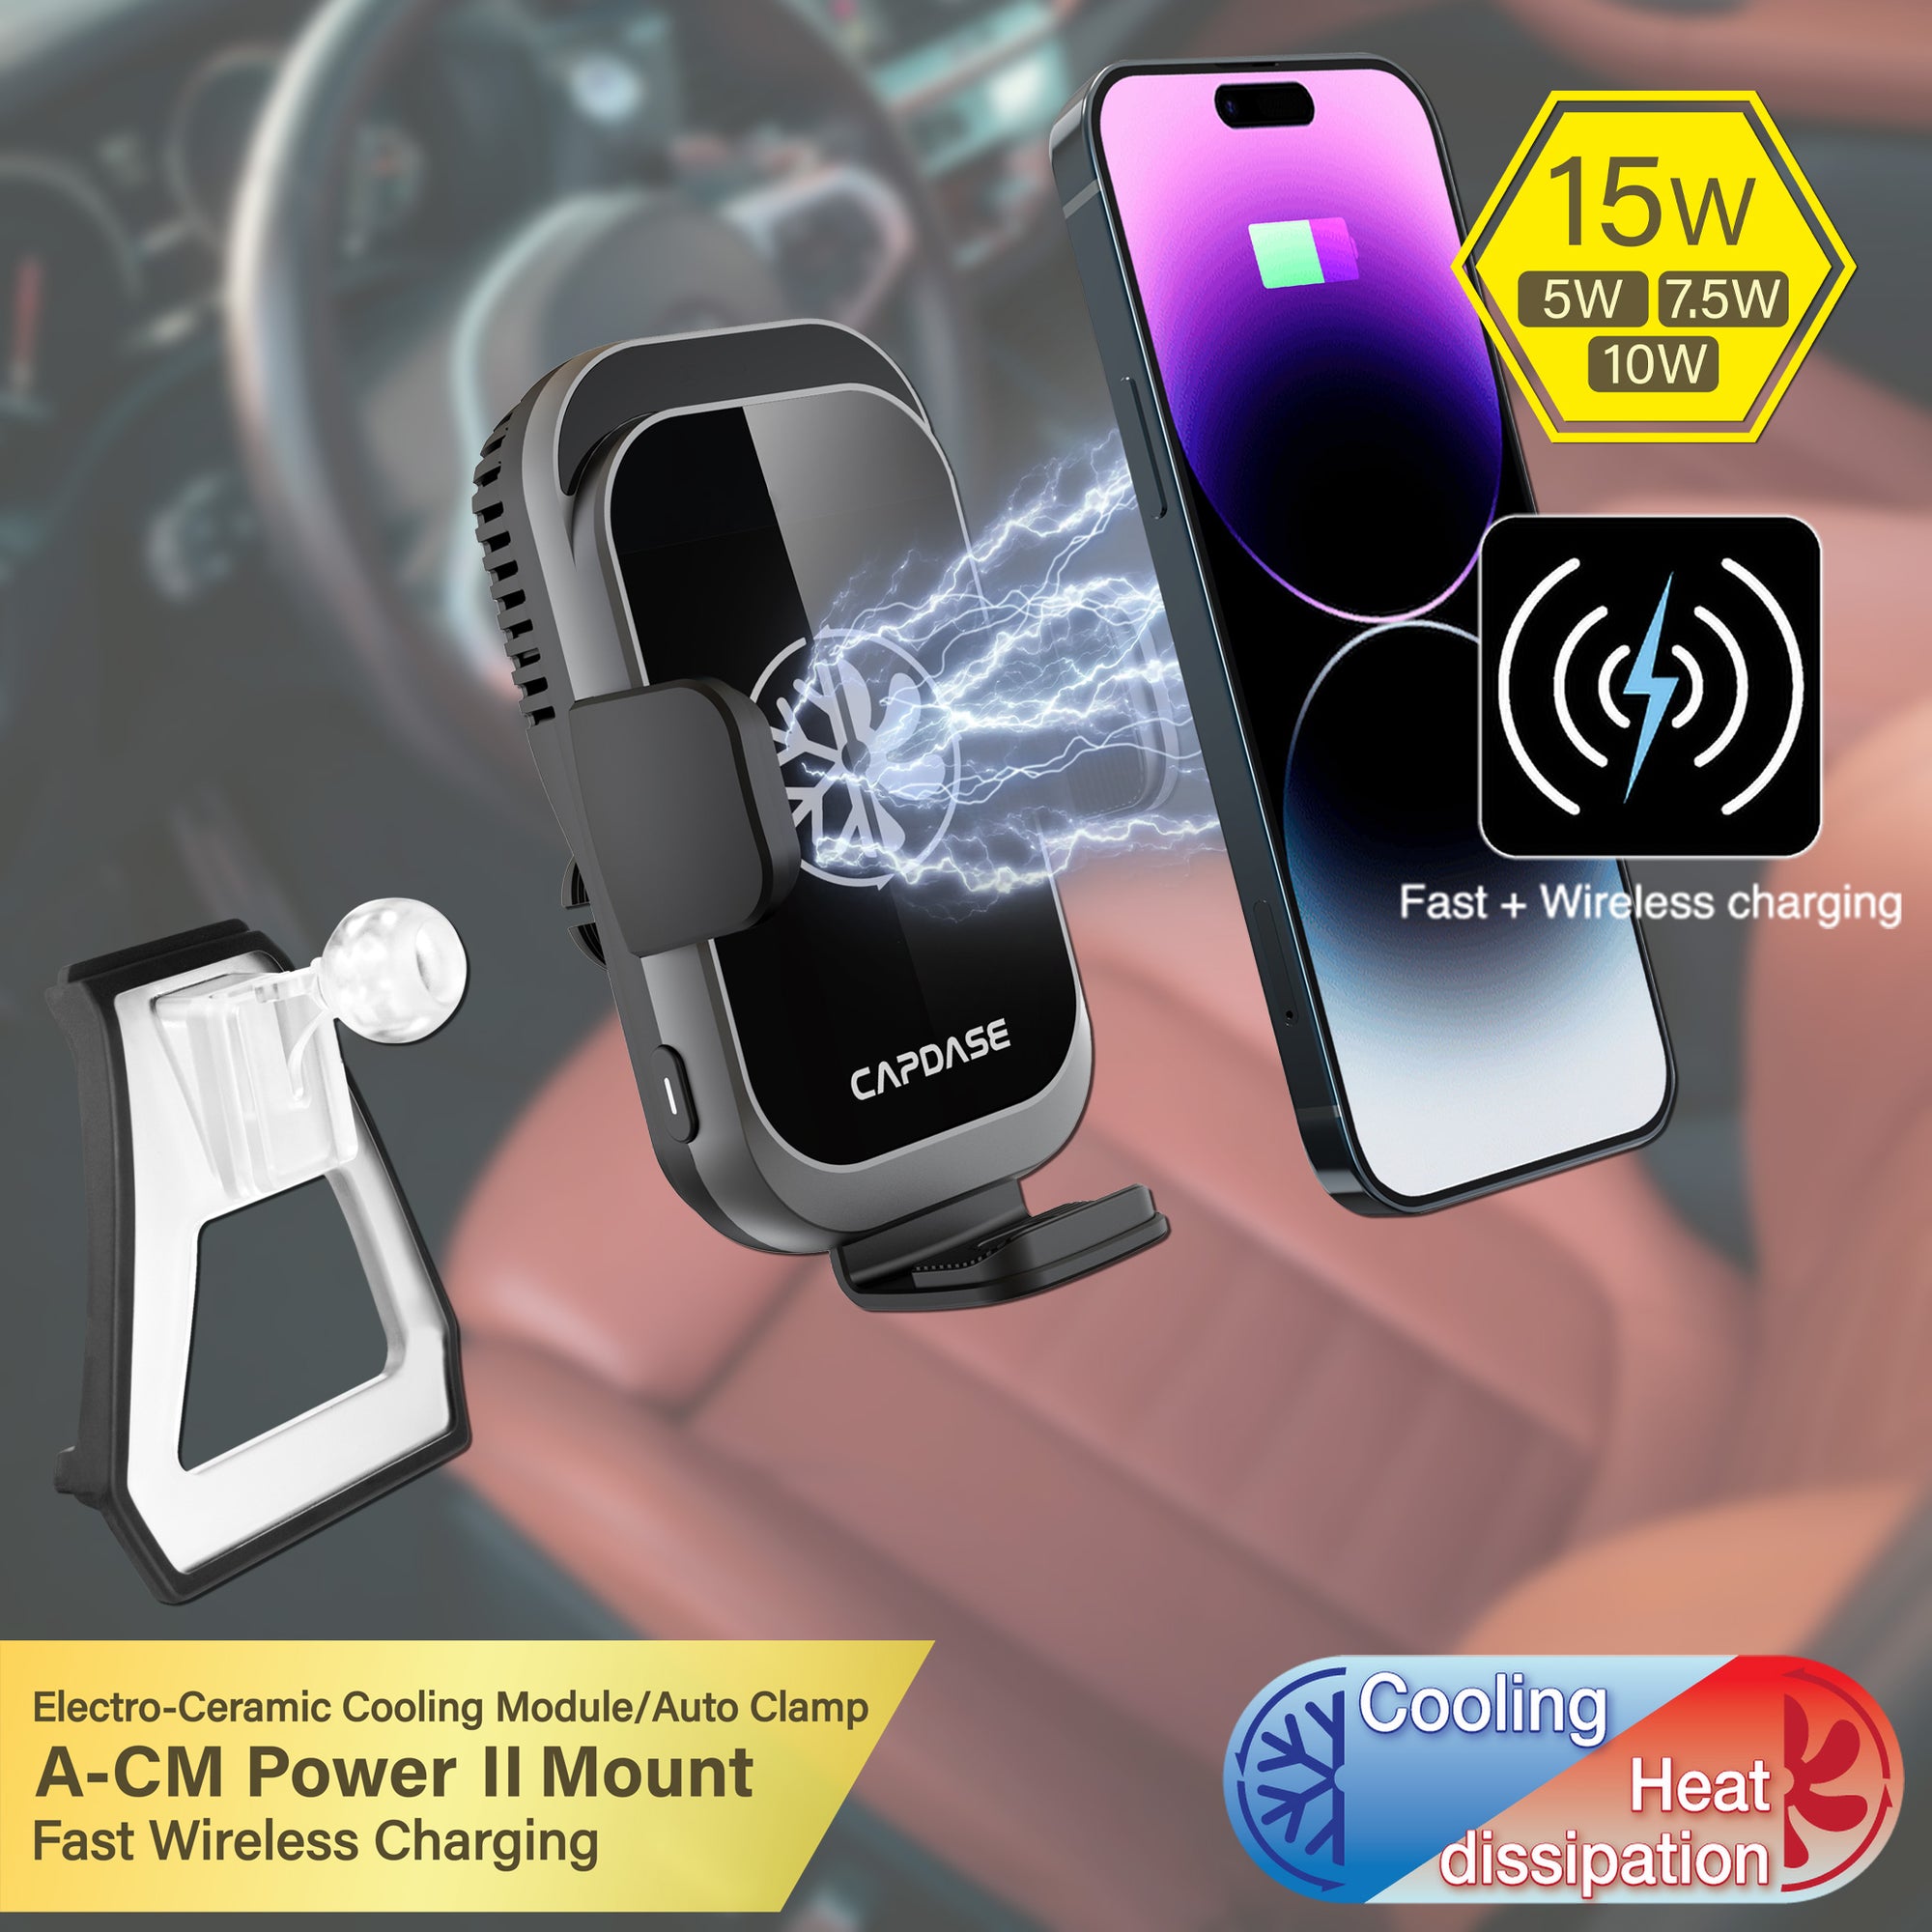 A-CM Power II Ceramic Cooling Fast Wireless Charging Auto-Clamp Car Mount DSH Base-BMW540 for BMW 5, 6, GT (2018-2021)A-CM Power II Ceramic Cooling Fast Wireless Charging Auto-Clamp Car Mount DSH Base-BMW540 for BMW 5, 6, GT (2018-2021)